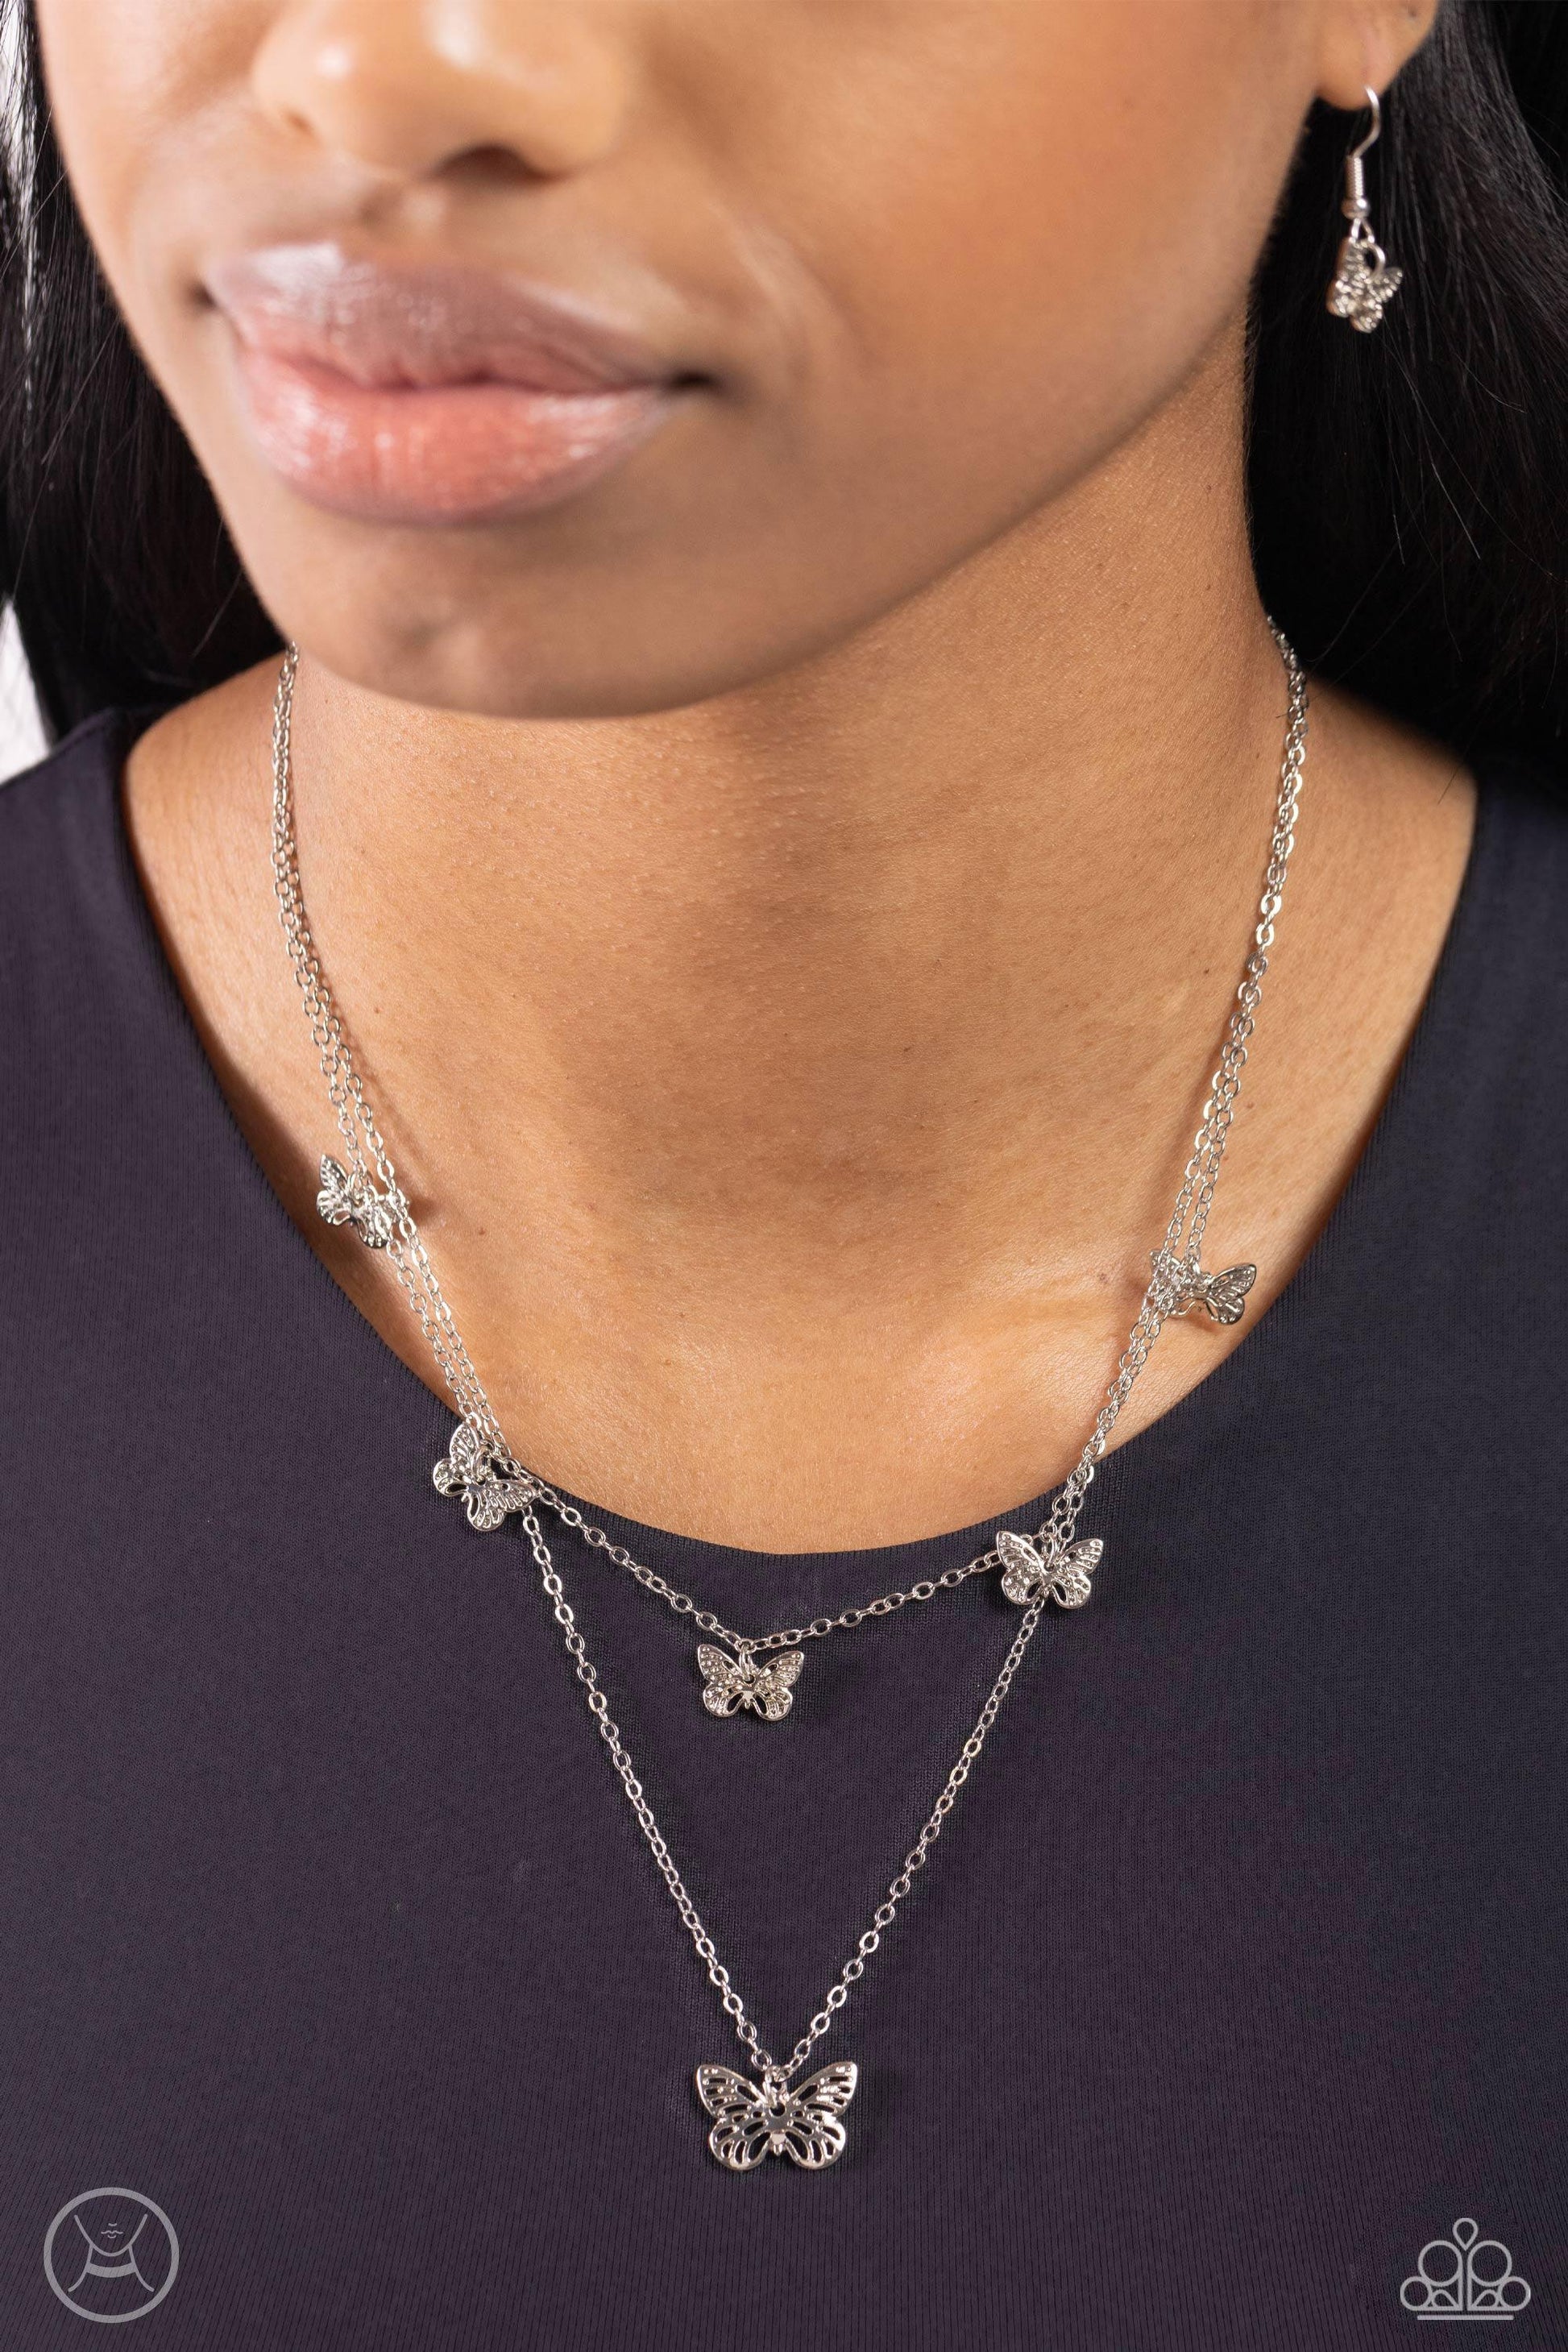 Paparazzi Accessories - Butterfly Beacon - Silver Choker Necklace - Bling by JessieK